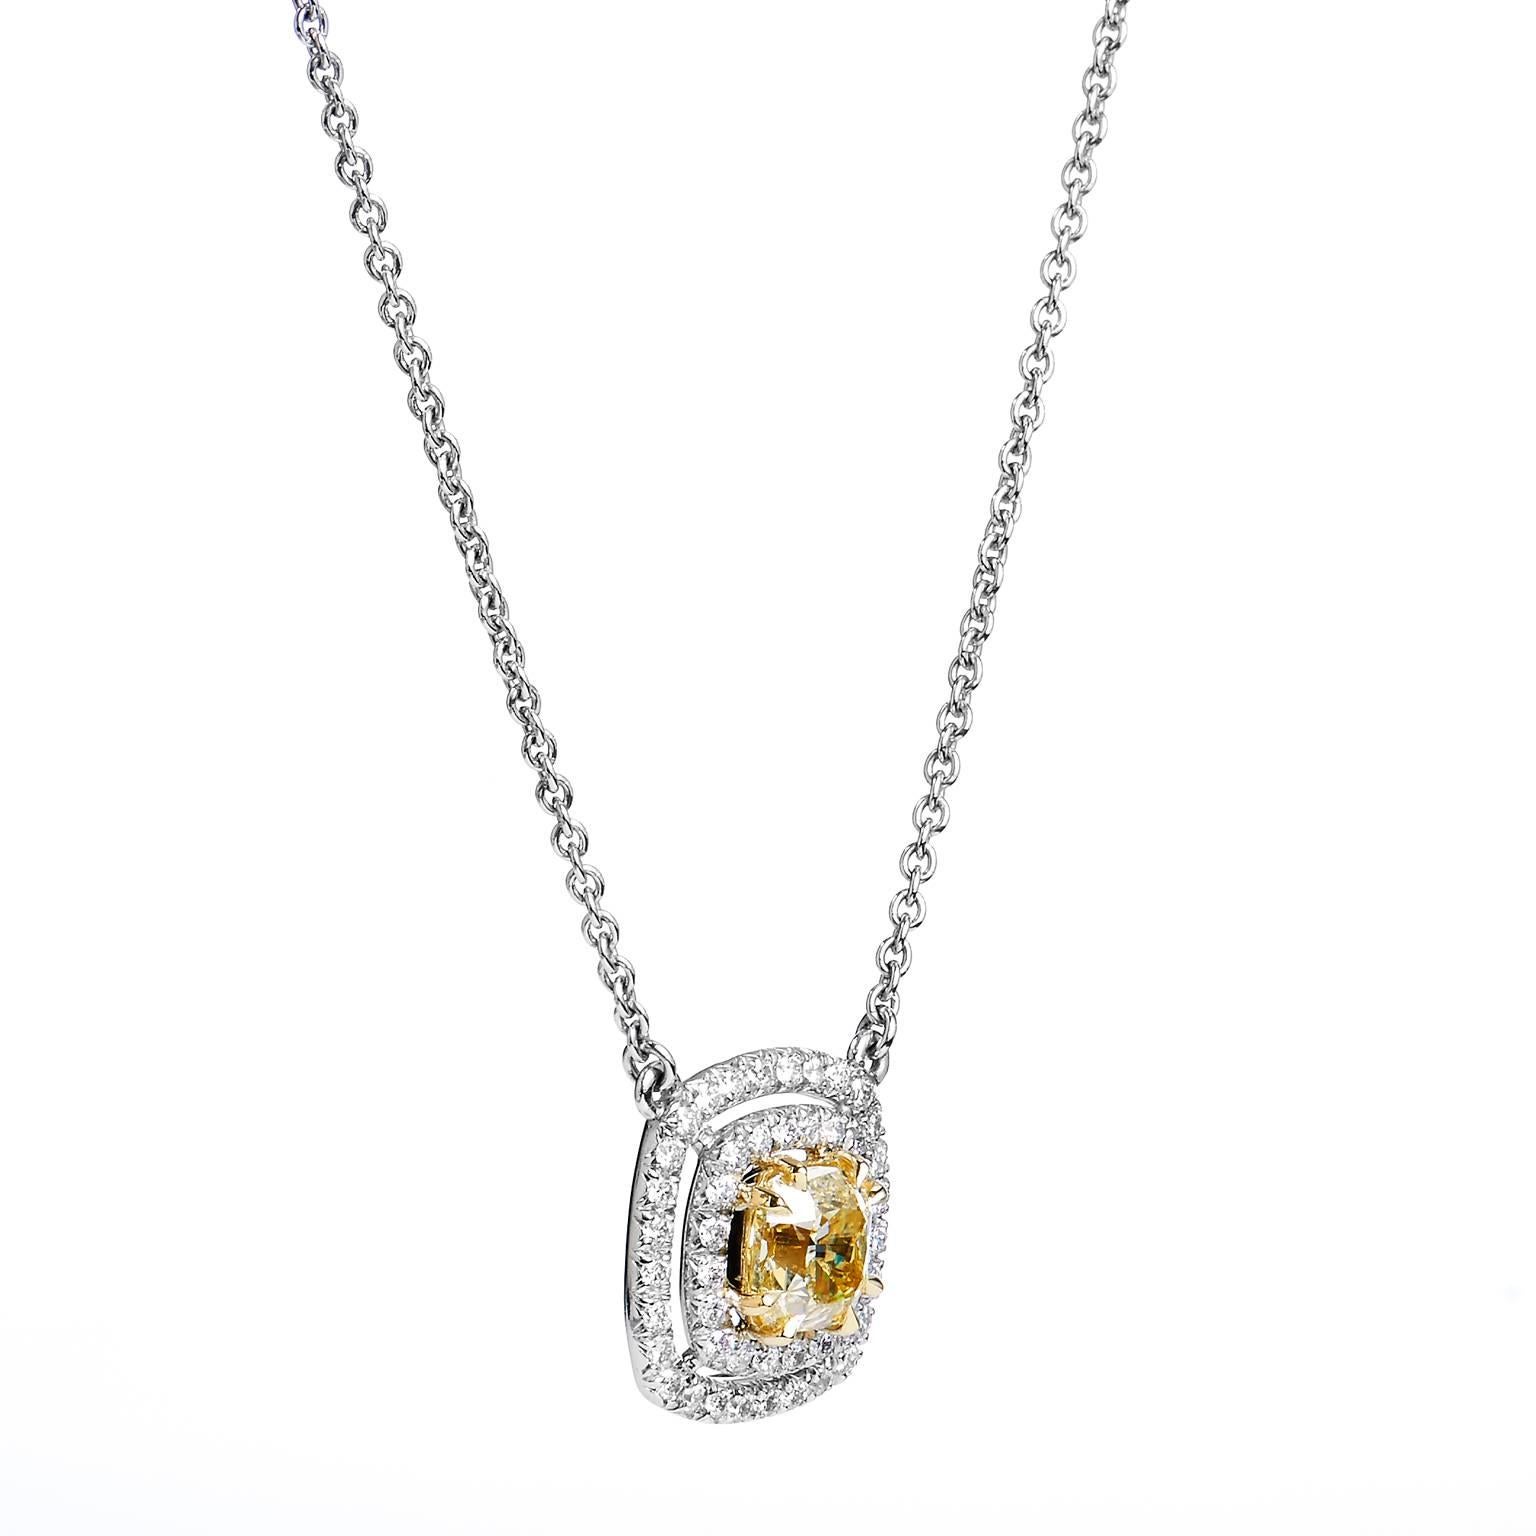 Handcrafted in platinum and 18kt yellow gold, this pendant showcases a 1.22ct fancy, brownish, greenish yellow diamond. This center diamond is GIA certified and graded VS2. Embracing the center diamond are 48 pieces of .42ct G/H VS pave diamonds.